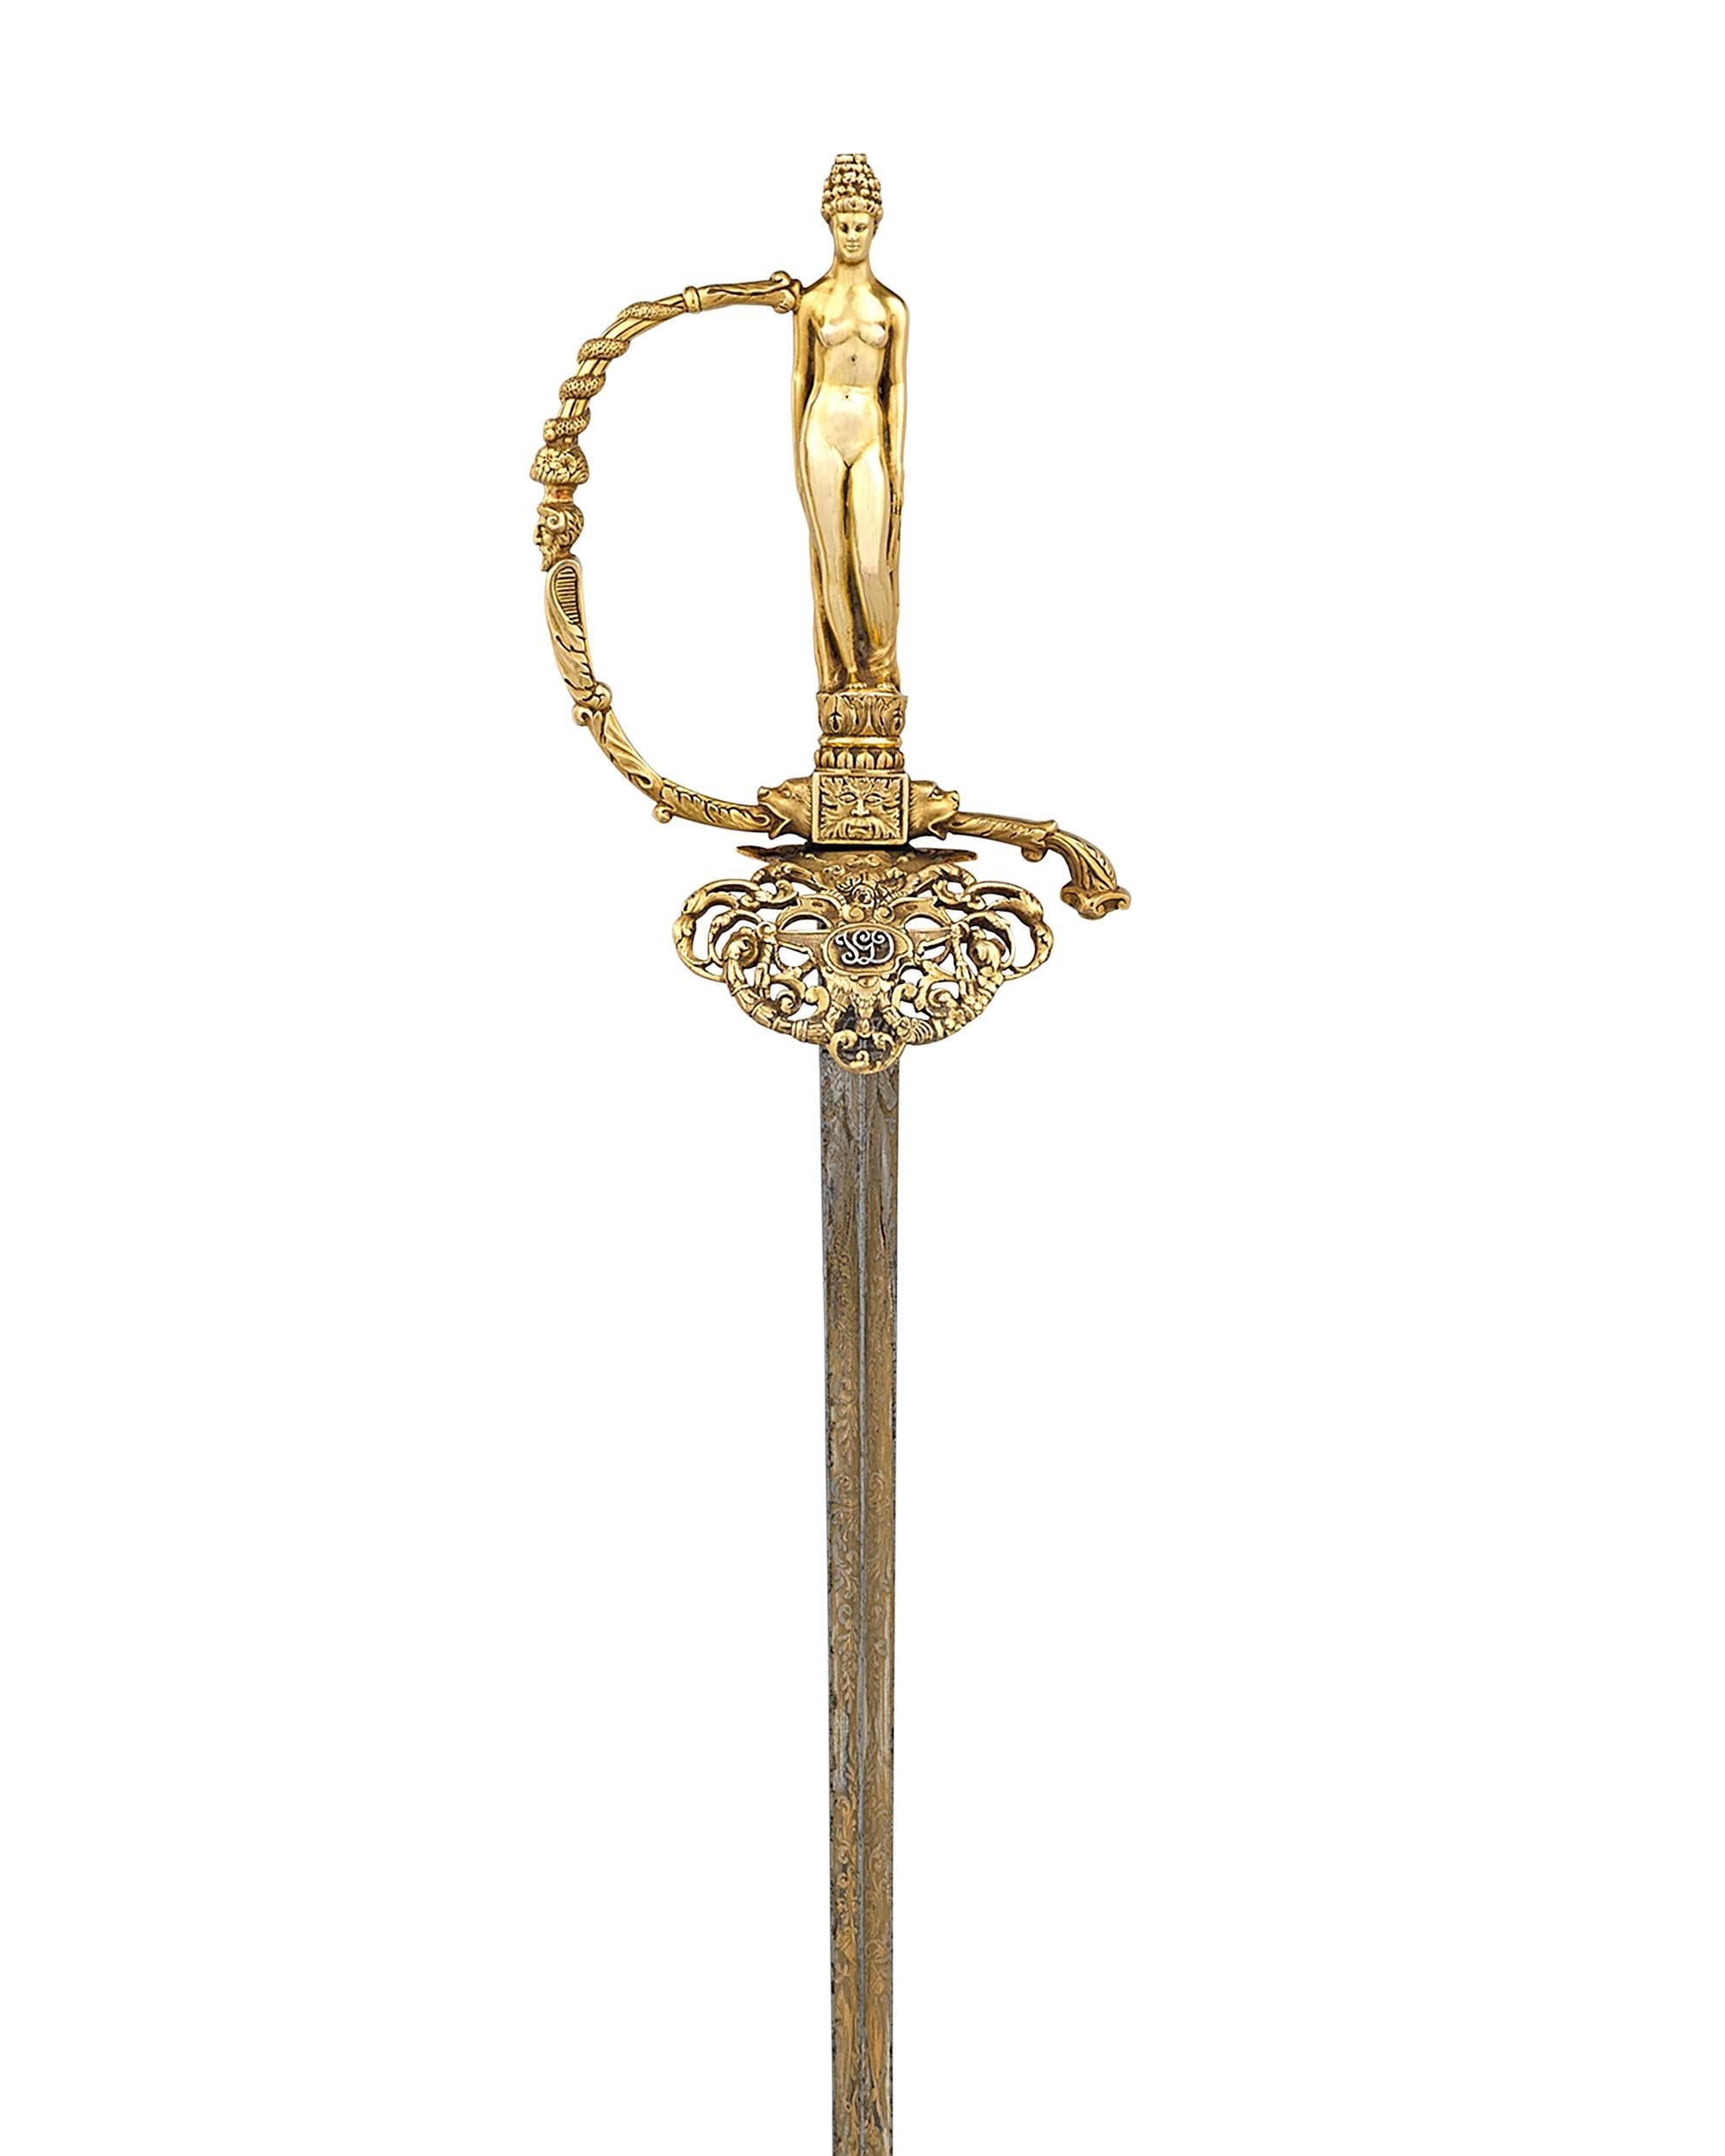 This important and unique sword was presented to the famed French painter Jean-Gabriel Domergue to commemorate the painter's election to the illustrious Académie des Beaux-Arts in 1950. One of the highest honors bestowed on a French artist, the